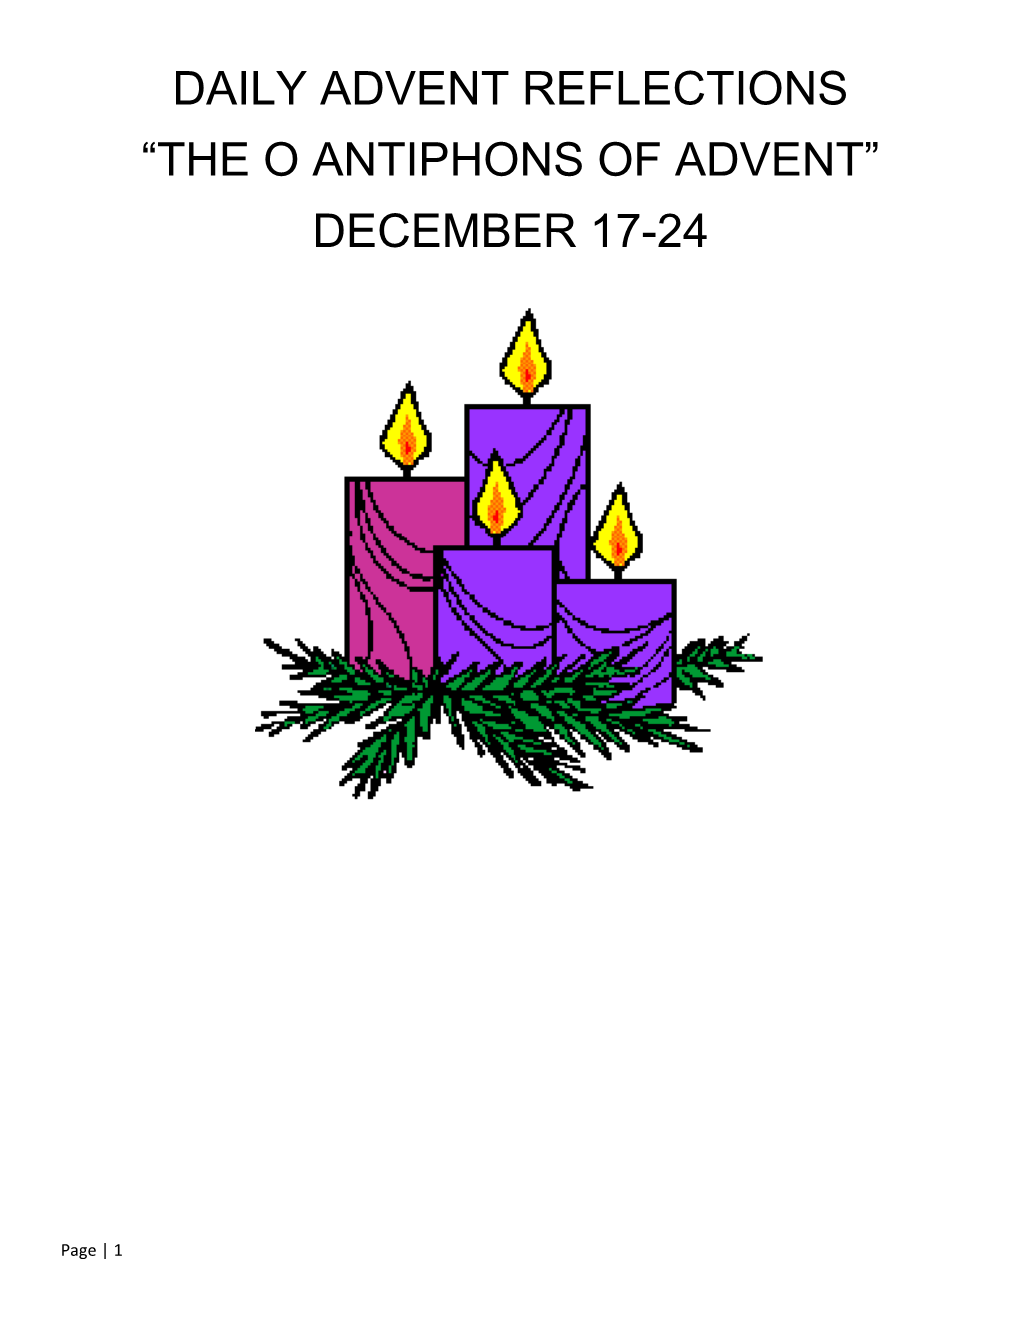 “The O Antiphons of Advent” December 17-24